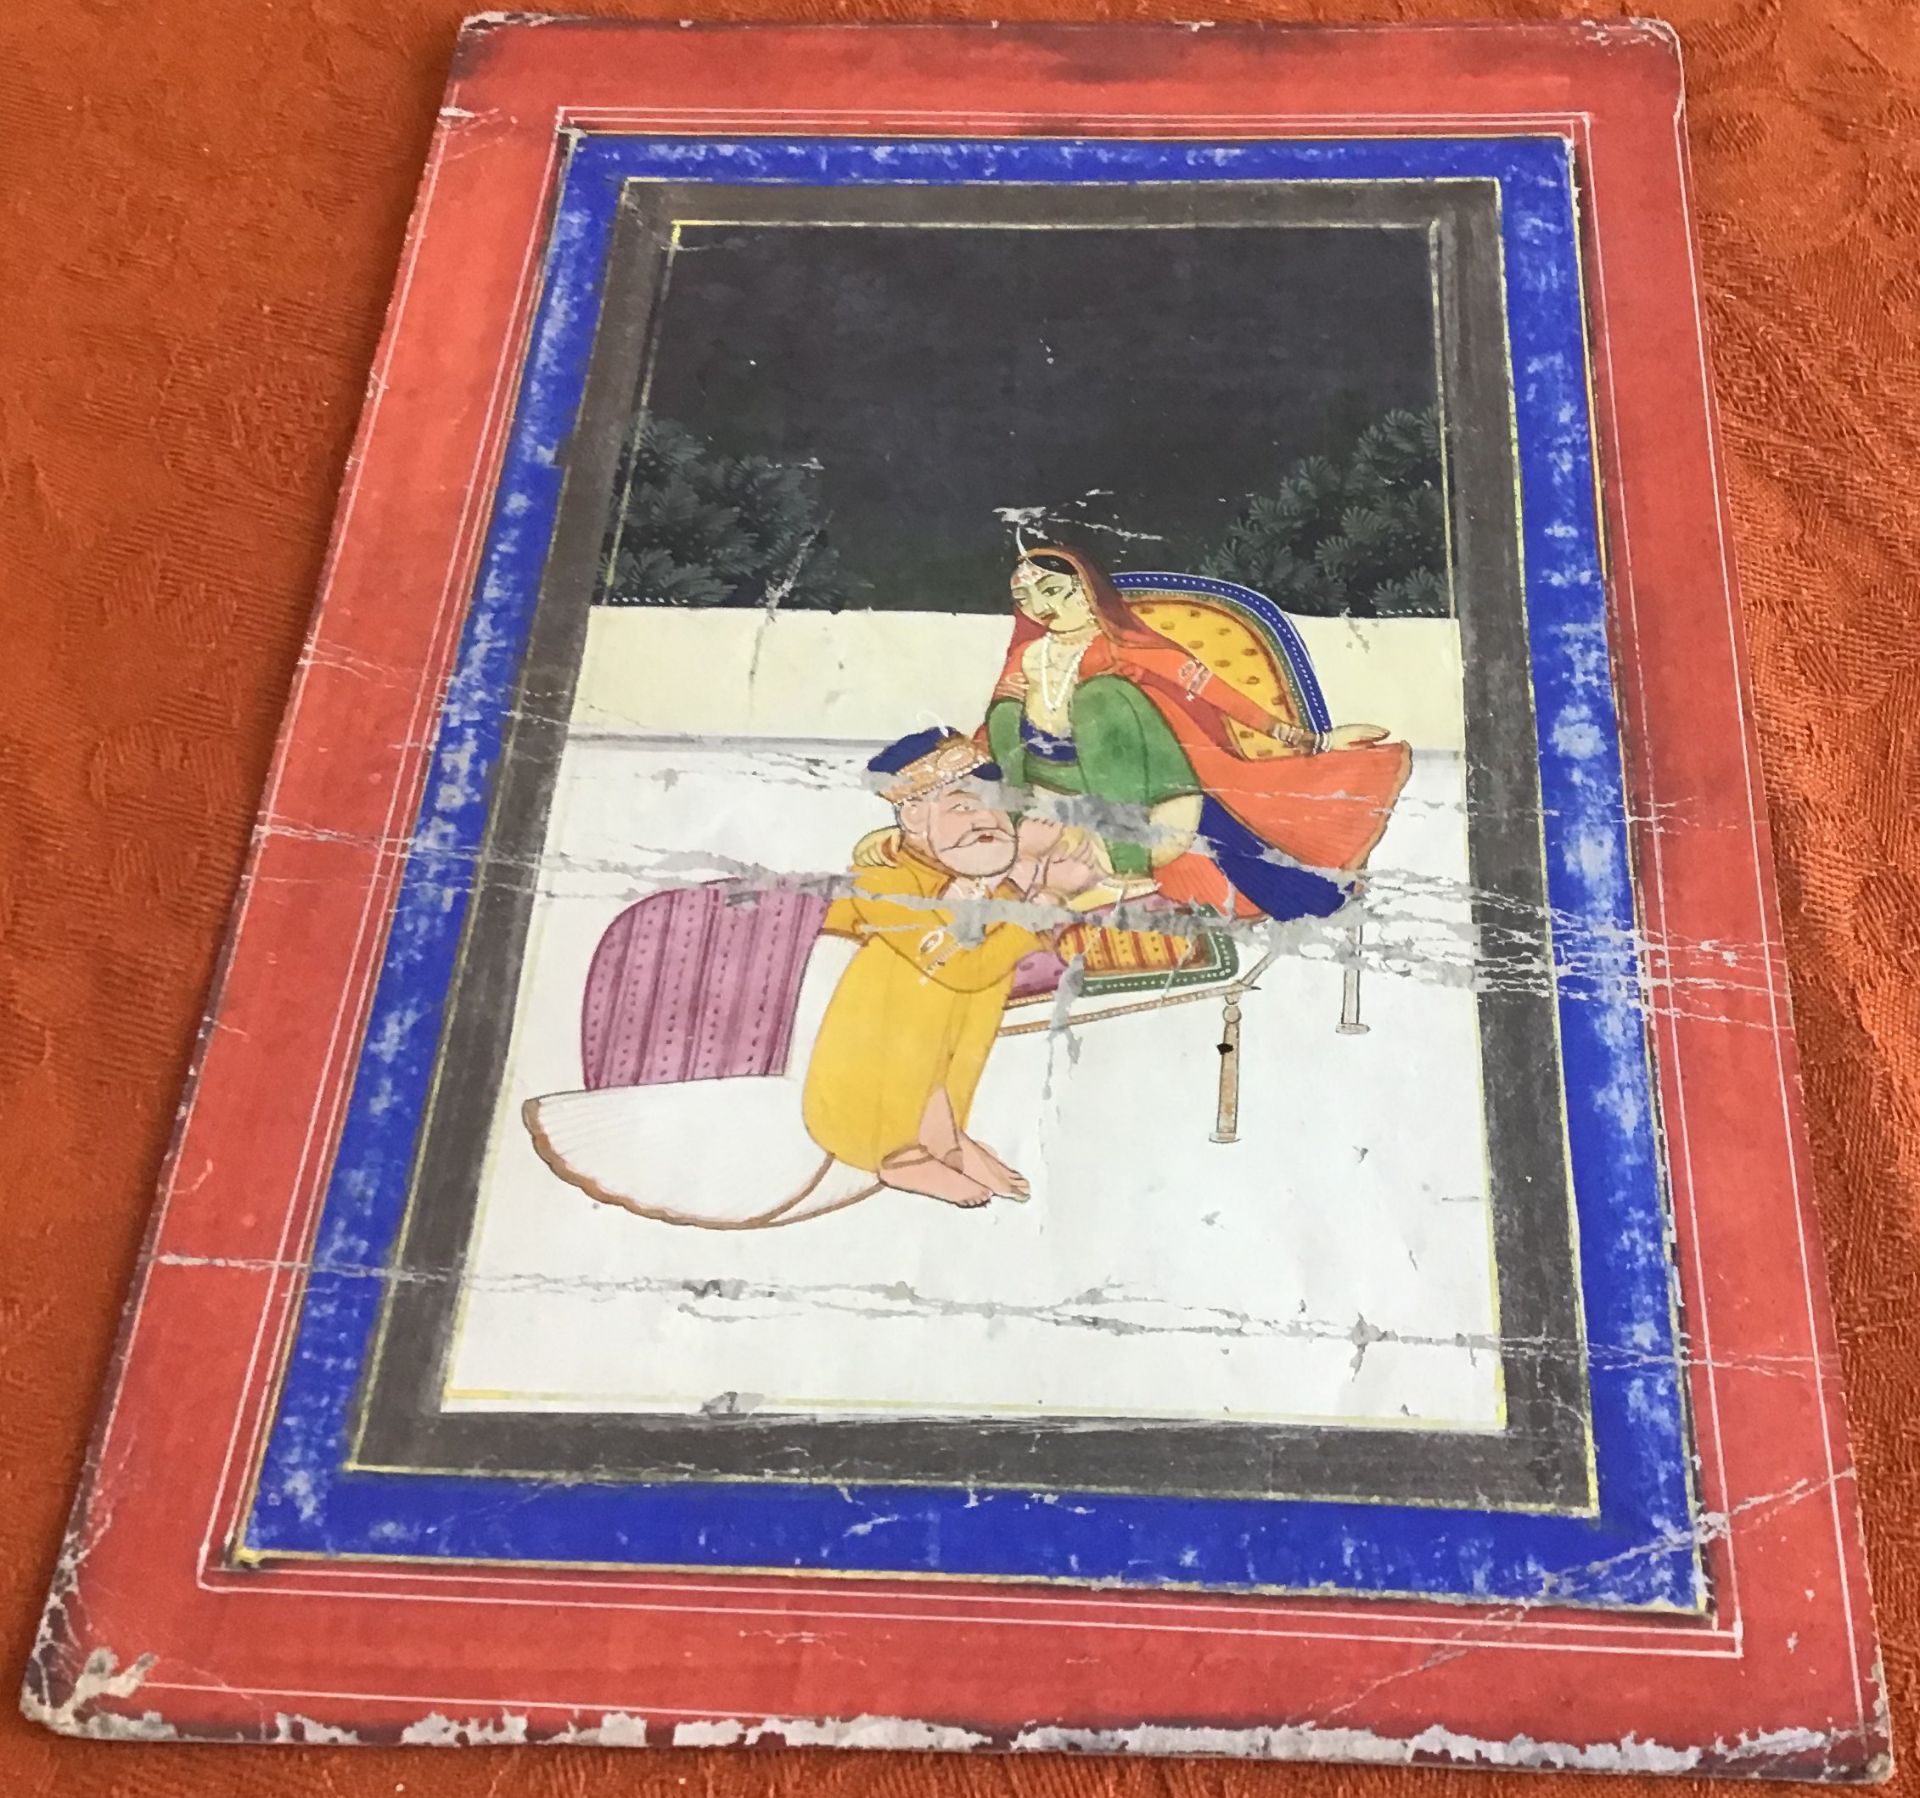 EIGHT EROTIC PAINTINGS. East India. Rajasthan, prob. Jaipur. Late 19th/beg. 20th c. Pigments and - Image 7 of 11